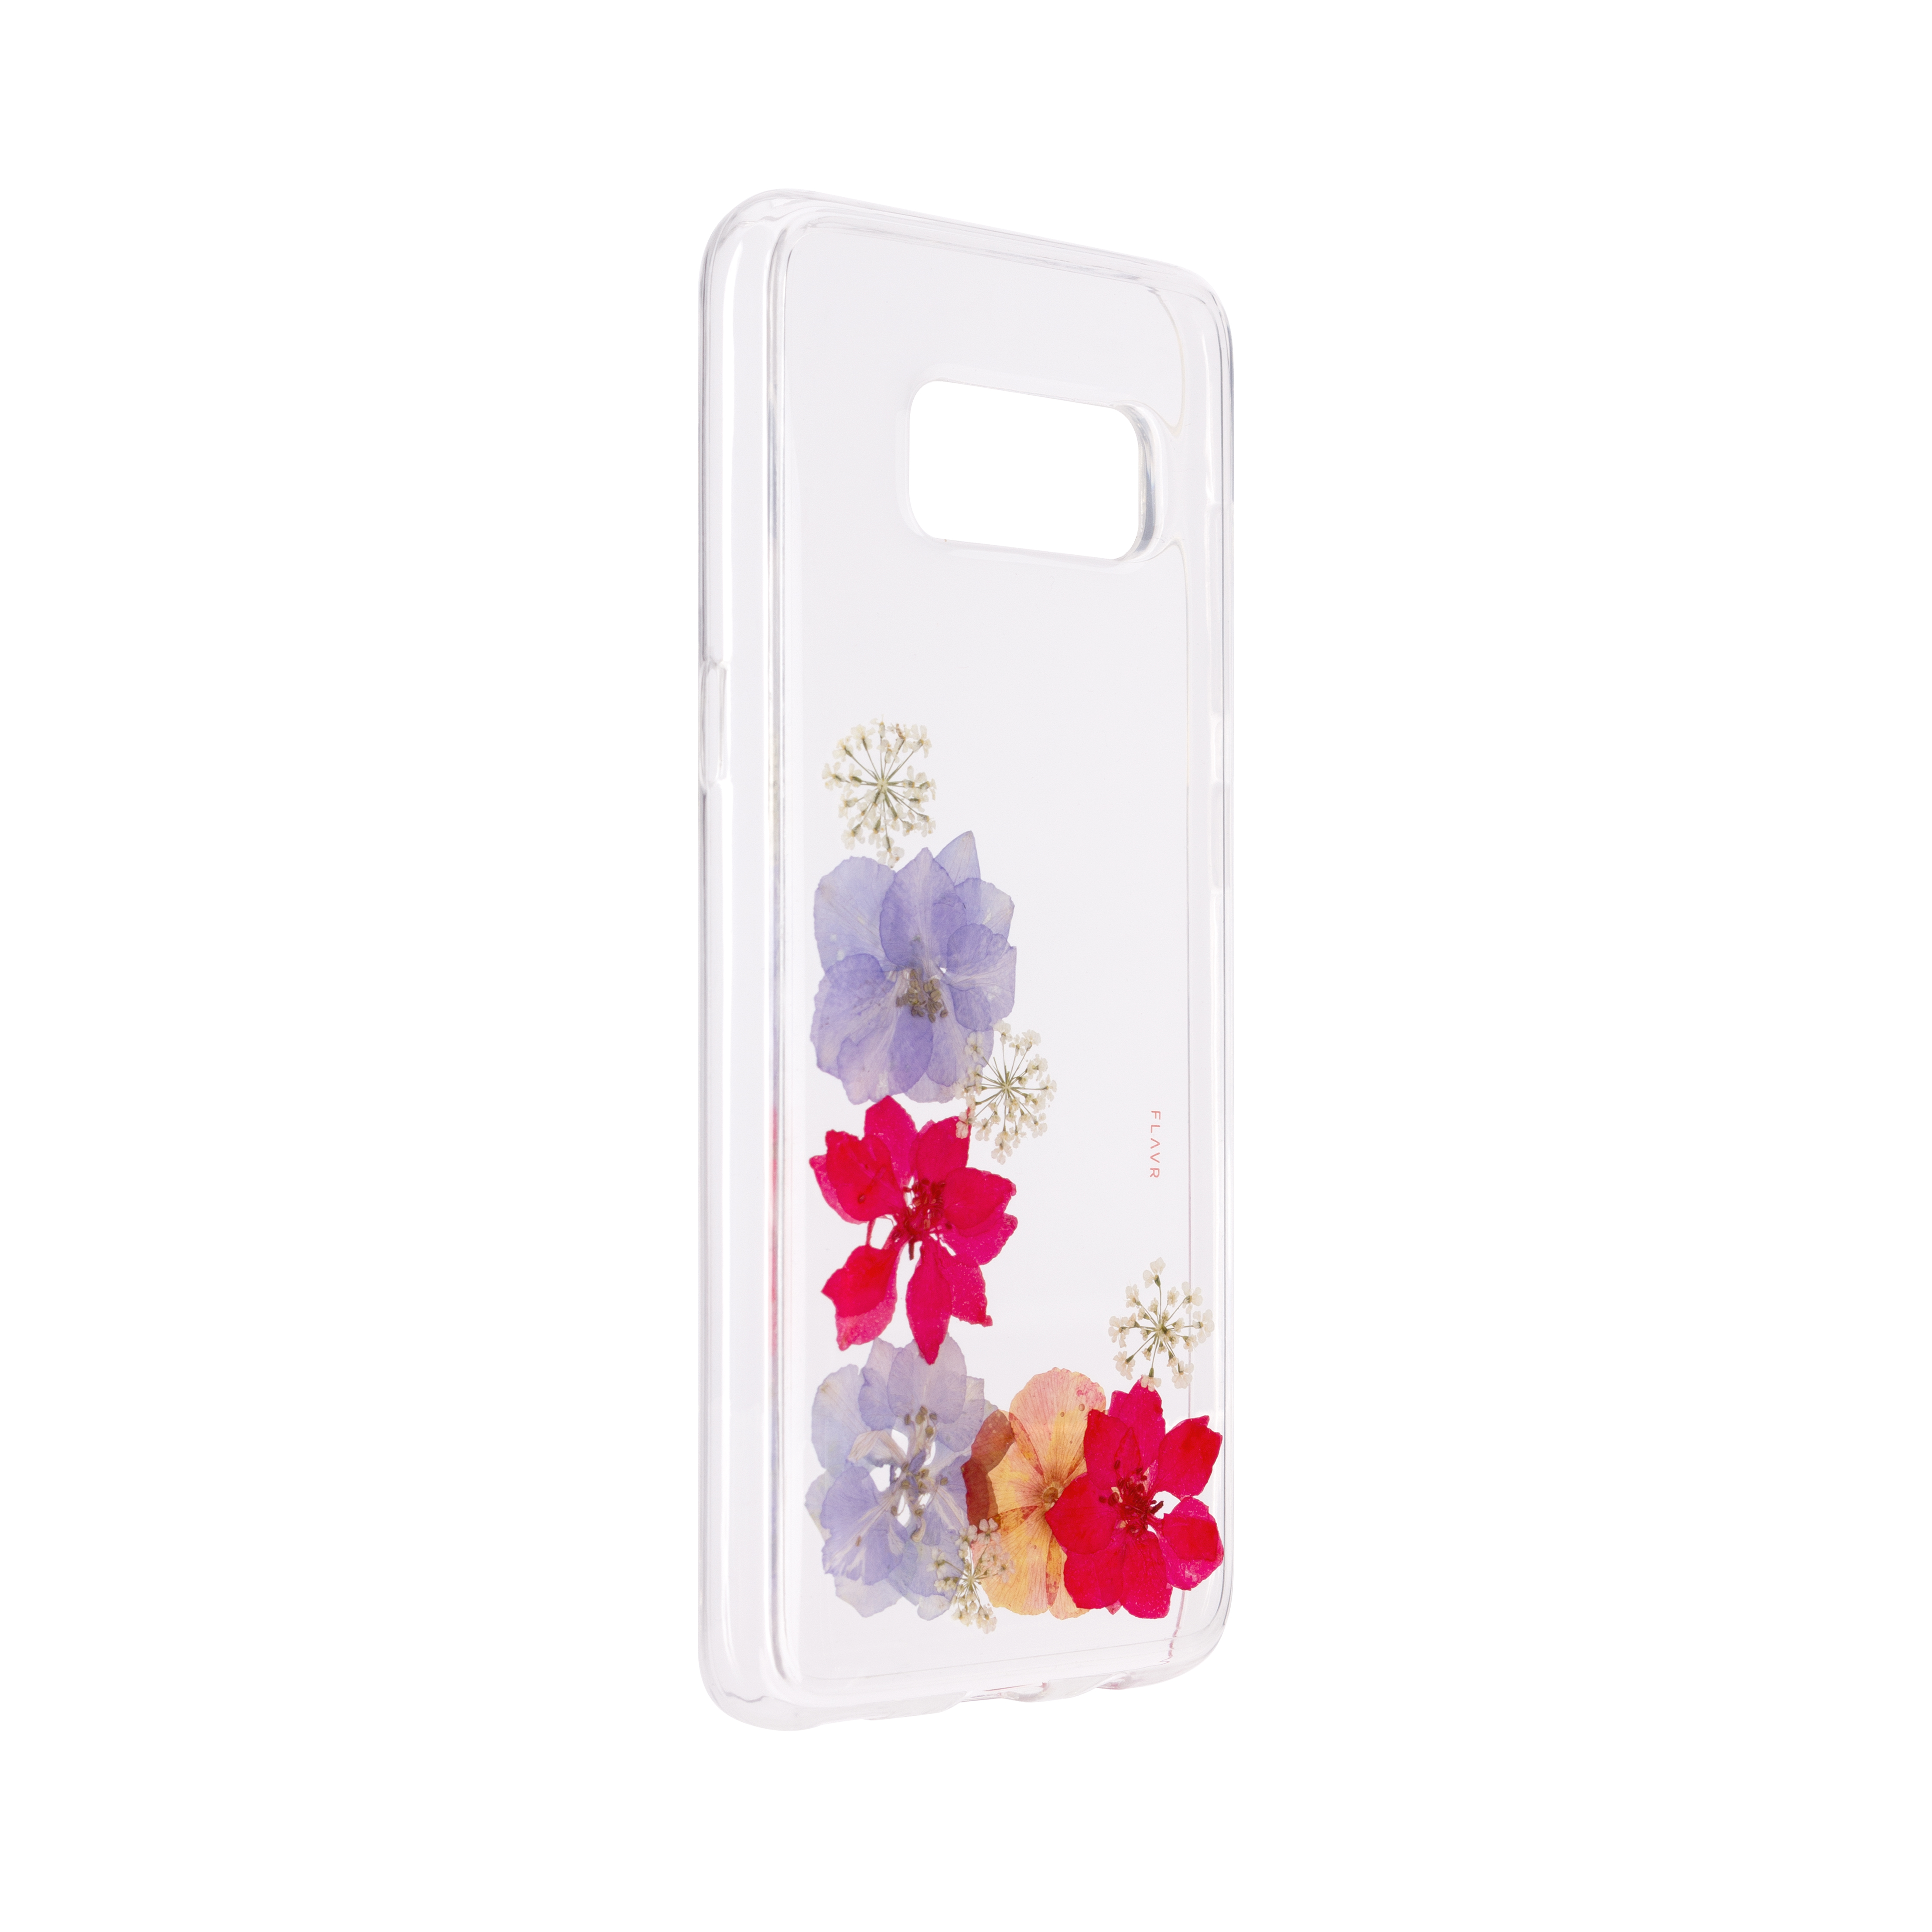 FLAVR iPlate Real Flower GALAXY S8, COLOURFUL Amelia, Backcover, SAMSUNG